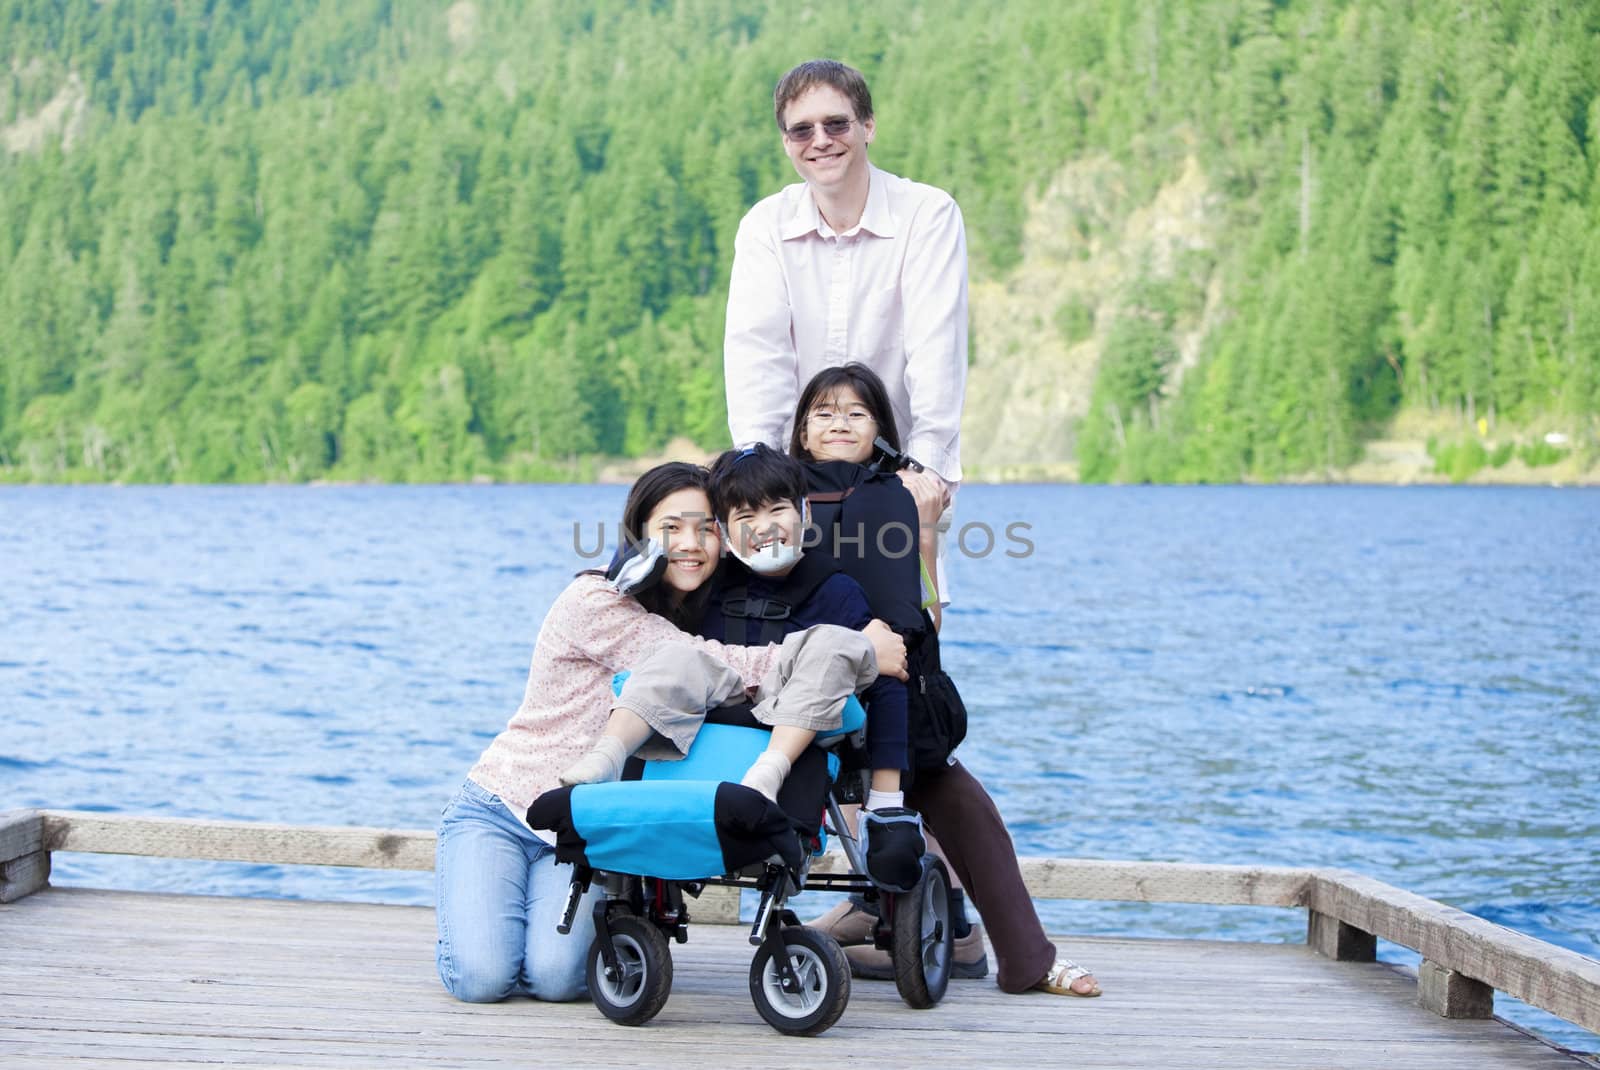 Disabled boy in wheelchair surrounded by family on lake pier by jarenwicklund